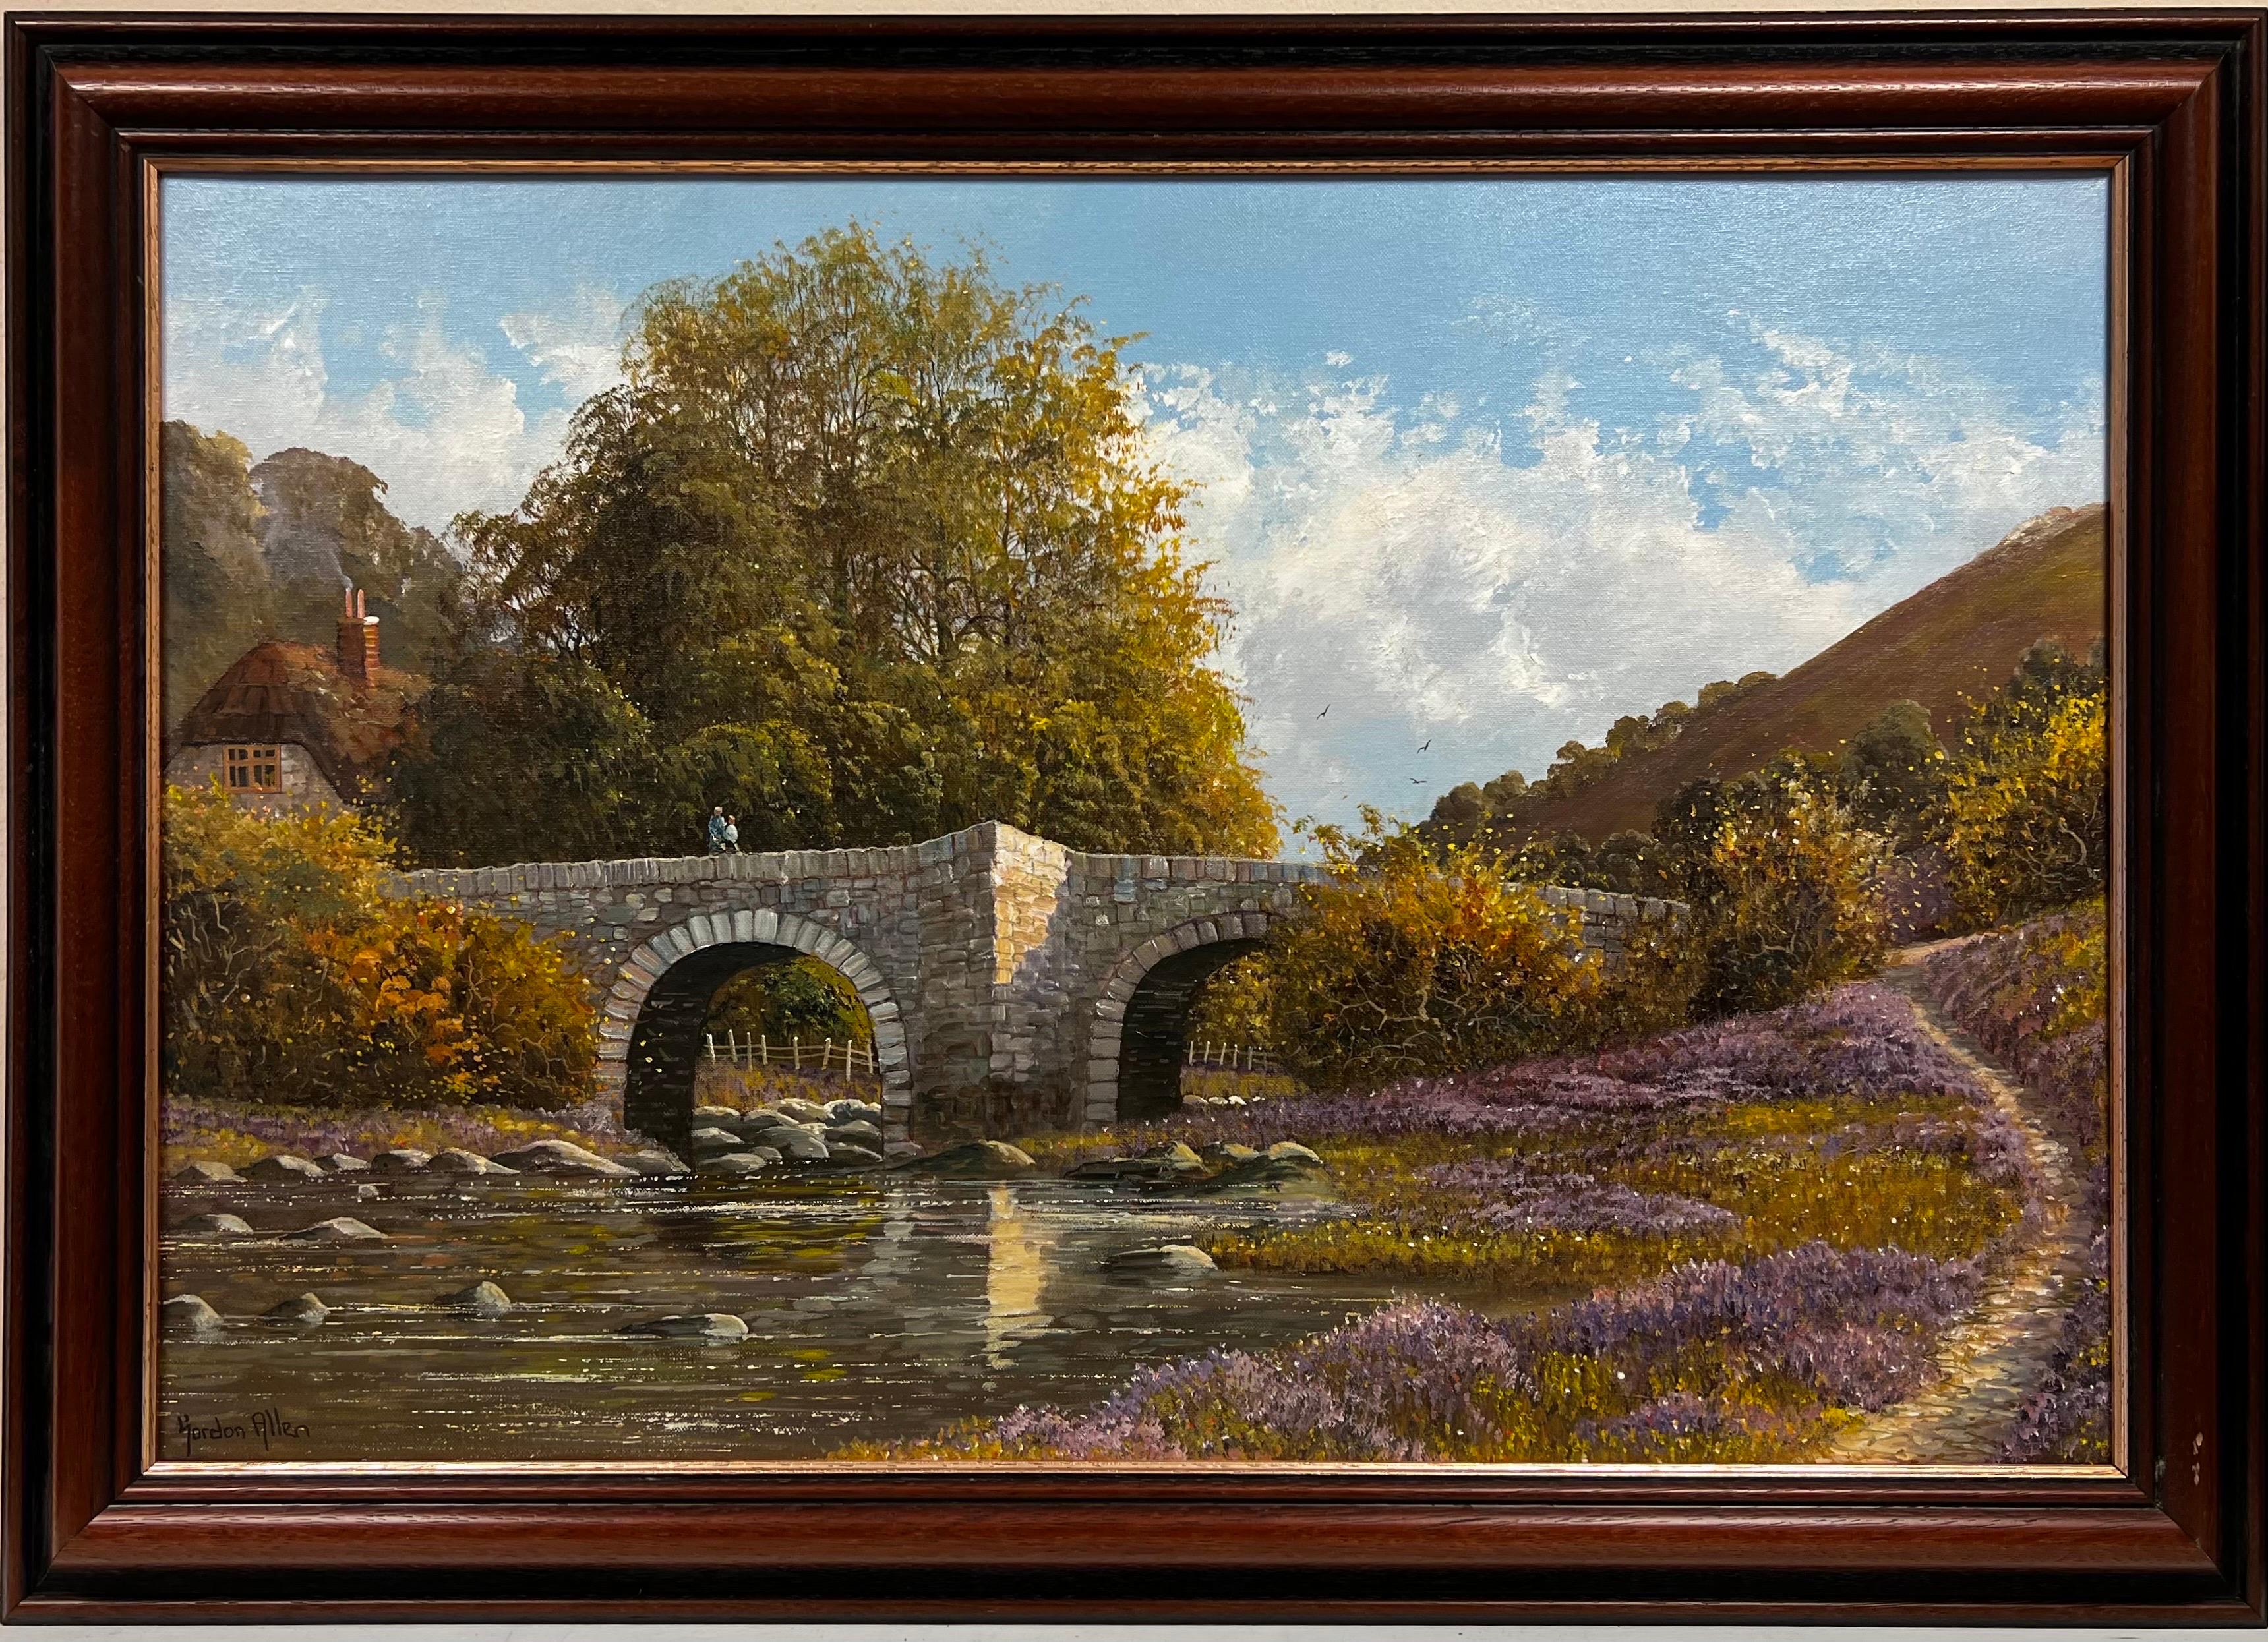 Tranquil English River Landscape with old Stone Bridge, signed original oil - Painting by Gordon Allen